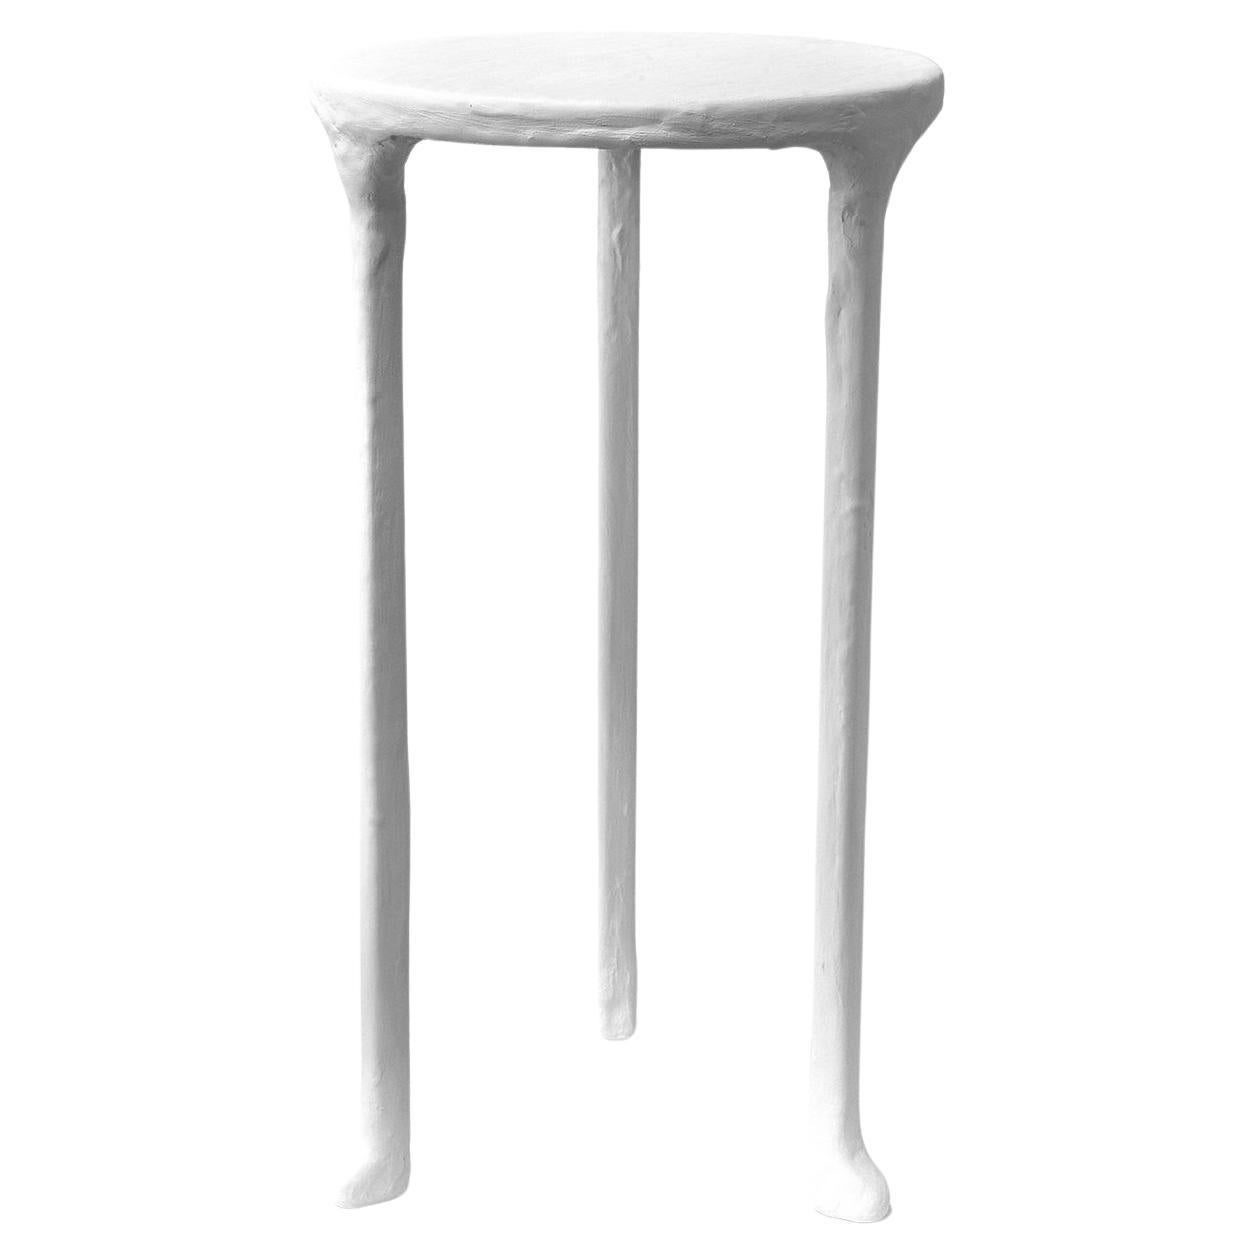 Side Table Classic Modern White Plaster and Steel Minimalist Hand-Shaped Contemp